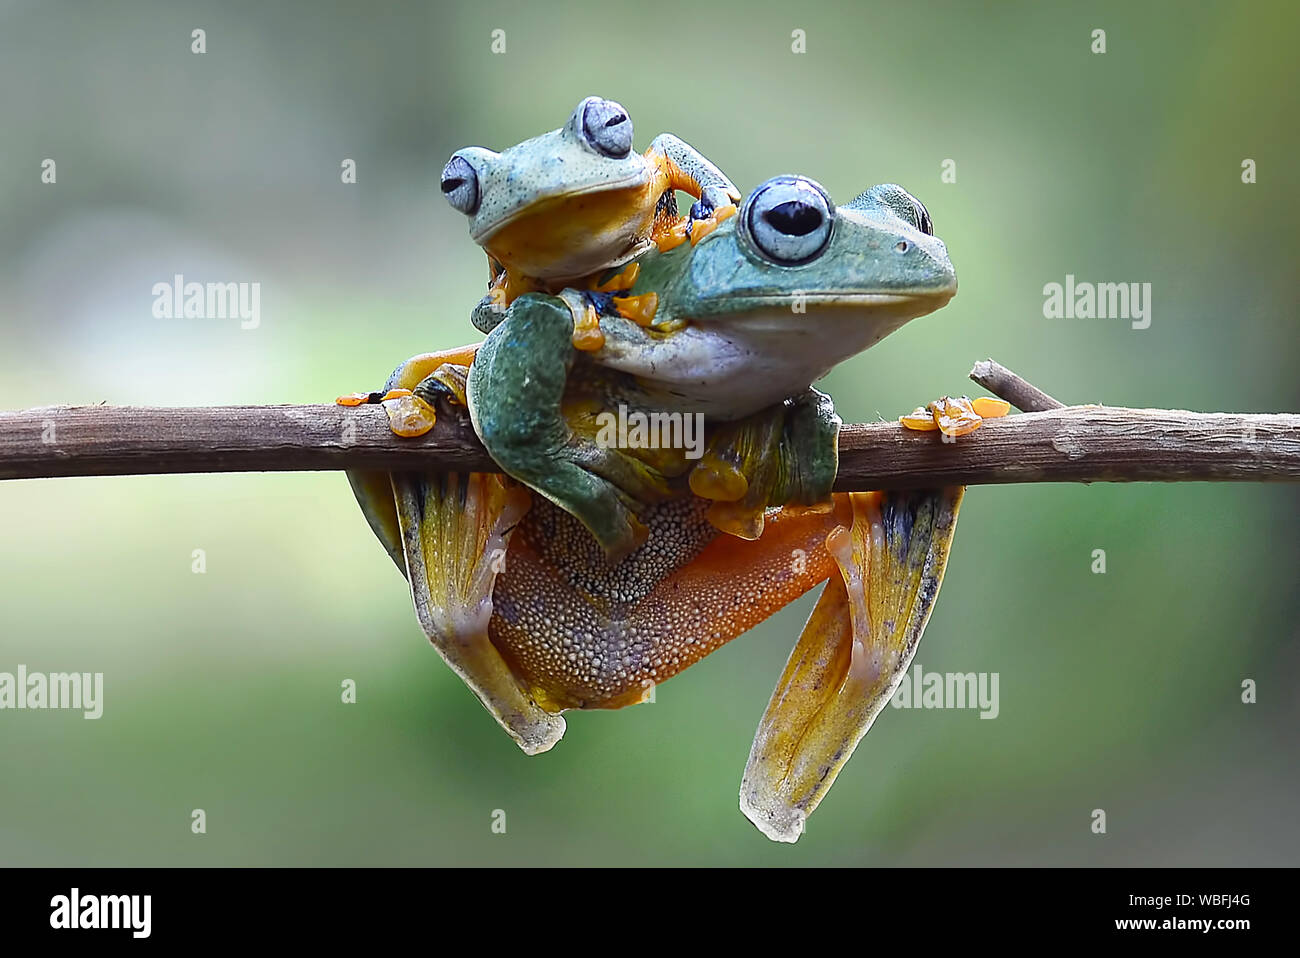 Close-up Of Frogs On Plant Stem Stock Photo